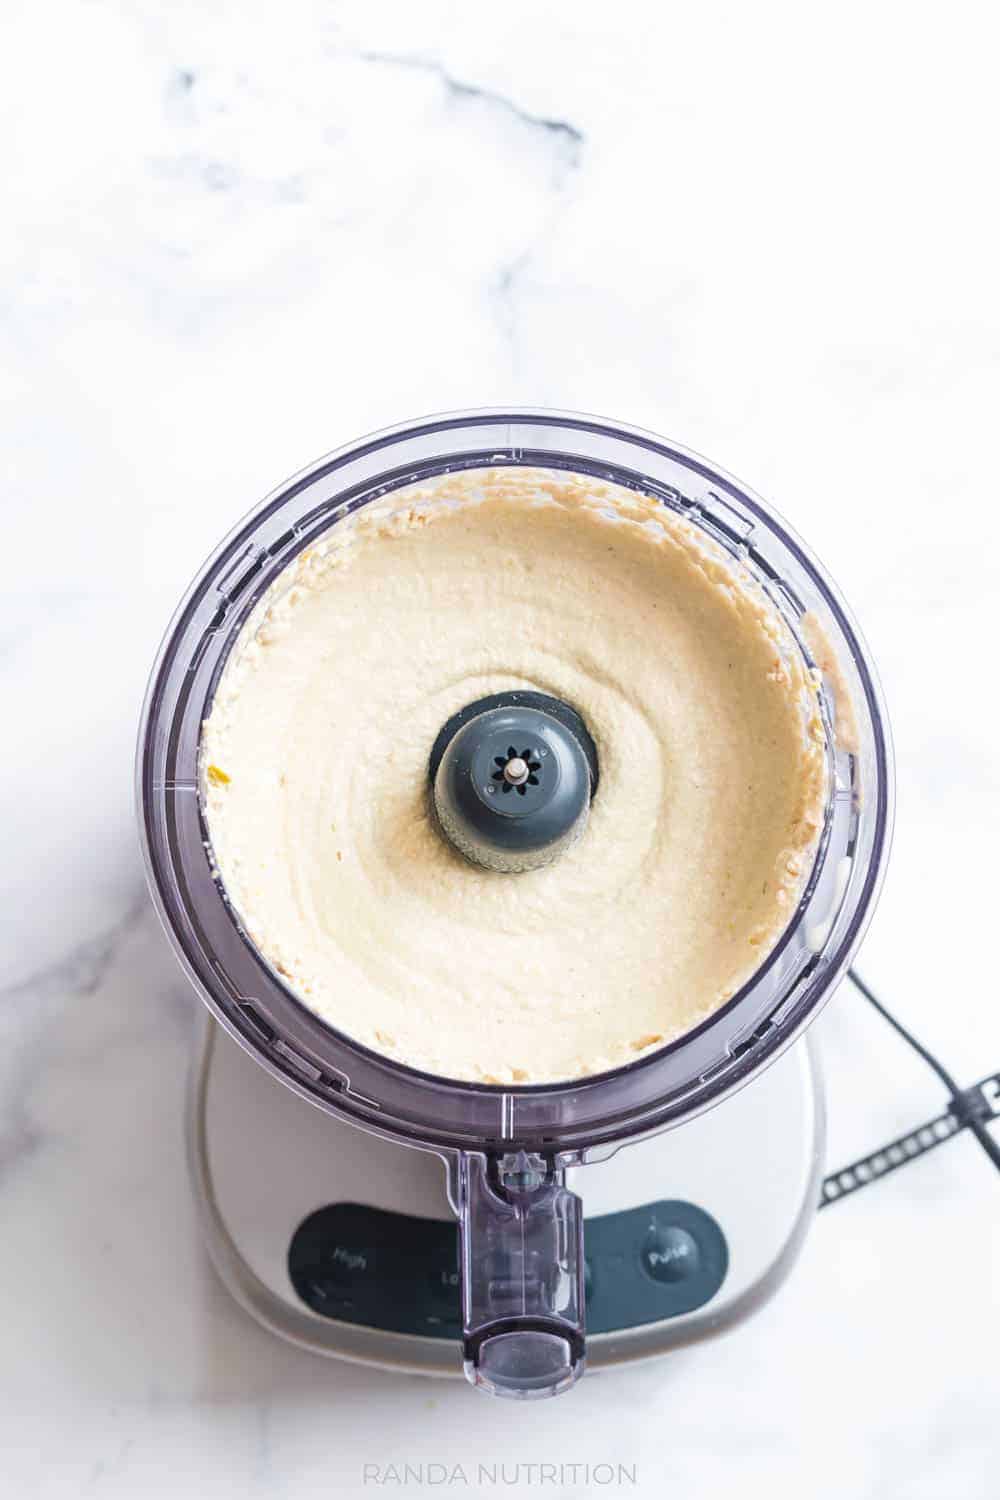 blended cashew sauce in a cuisinart food processor